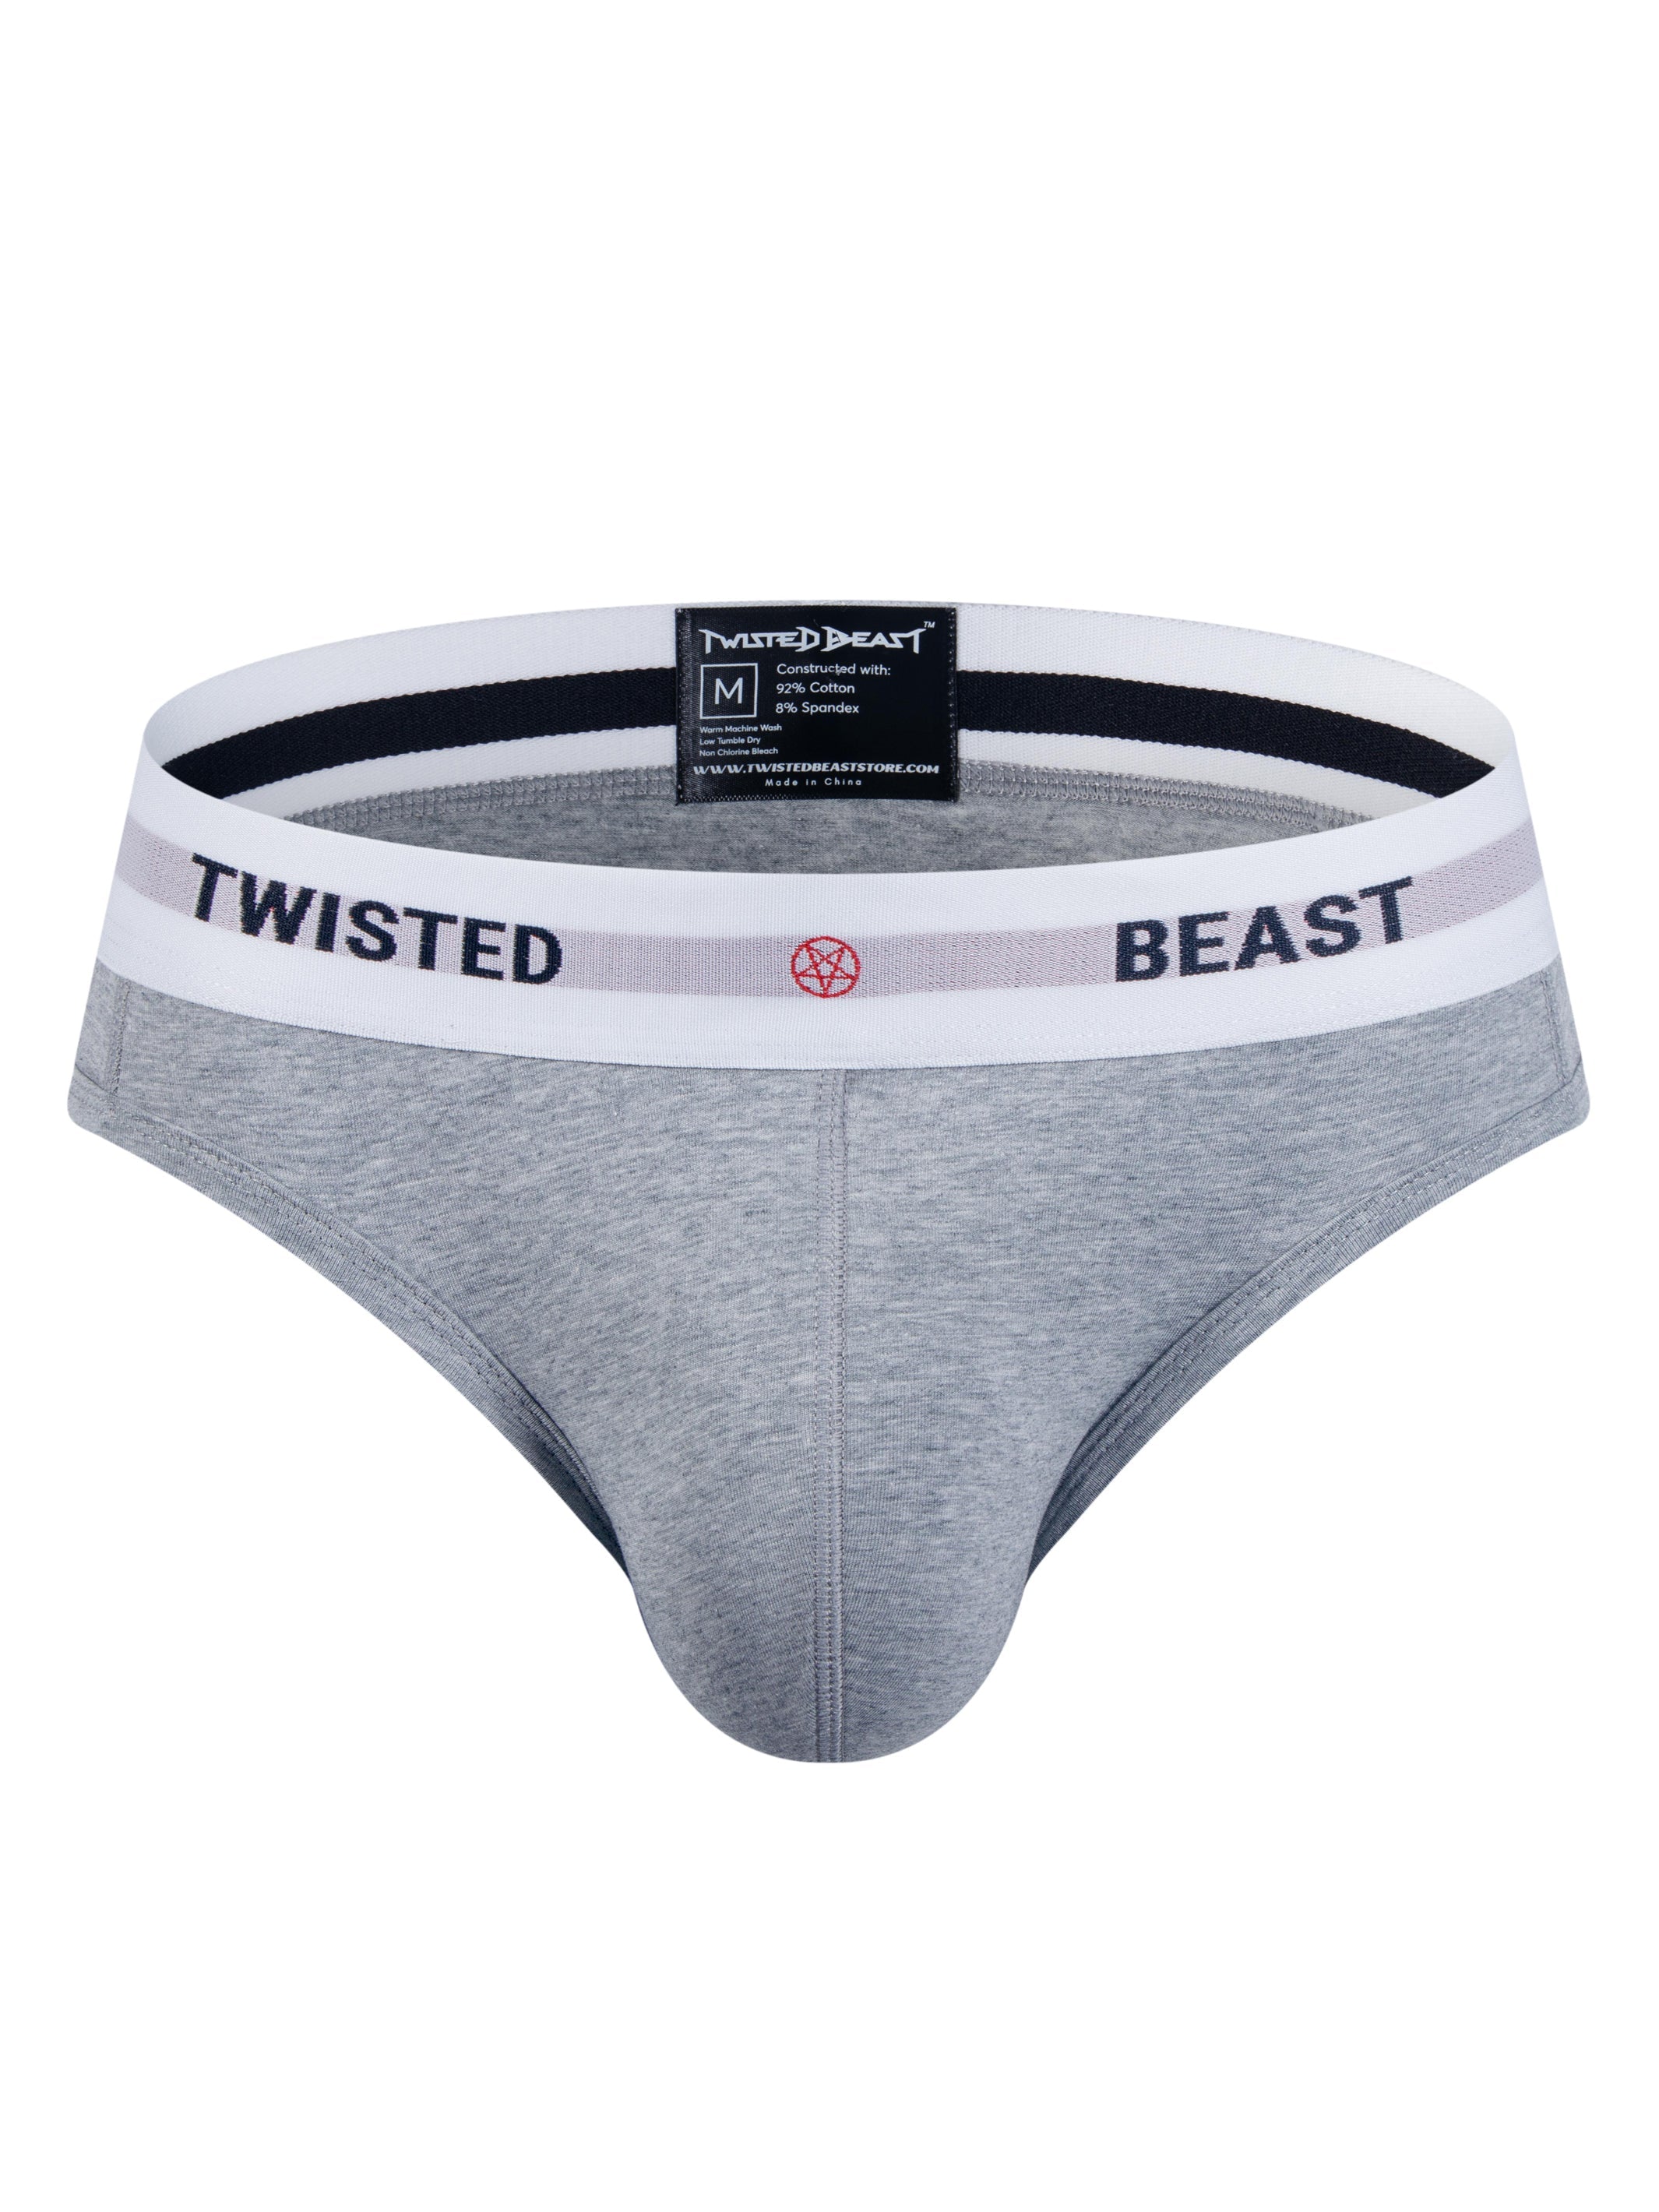 A pair of Insignia Brief's in grey by Twisted Beast from the front.